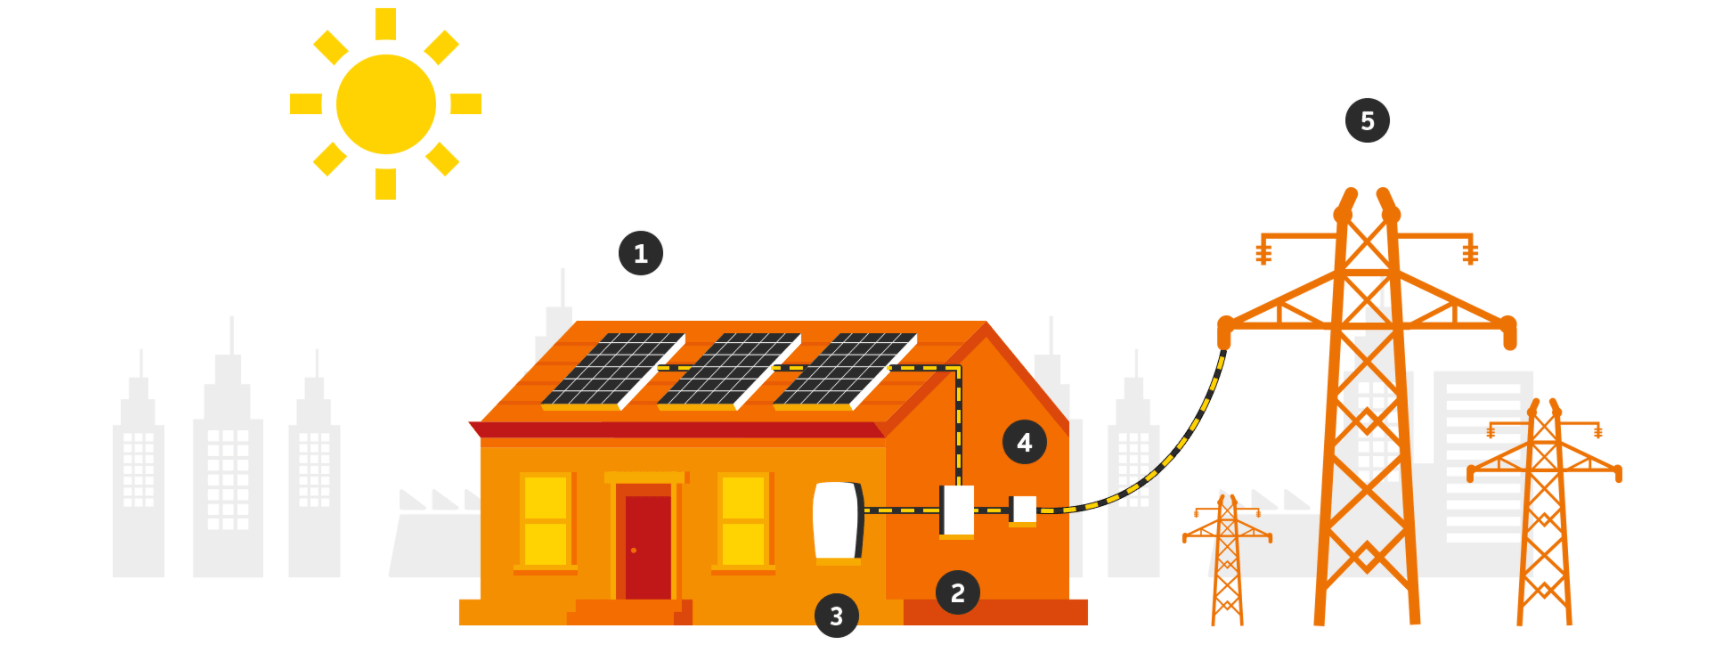 Solar Power System Solutions Working Diagram